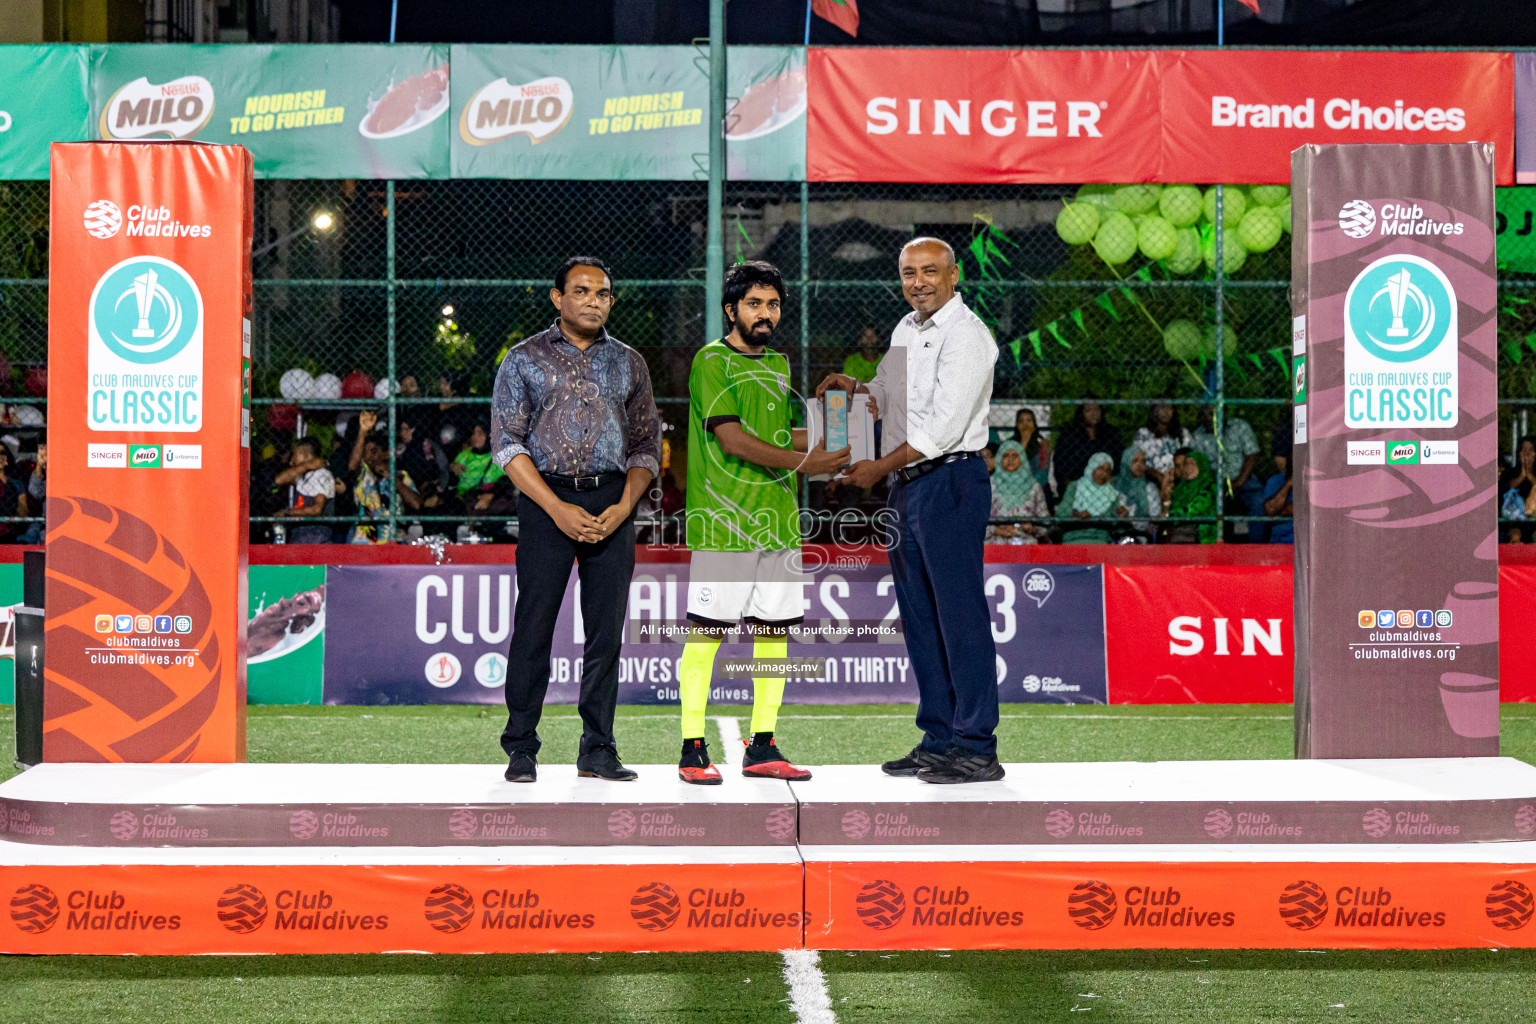 DJA vs Club 220 in Final of Club Maldives Cup 2023 Classic held in Hulhumale, Maldives, on Monday, 21st August 2023